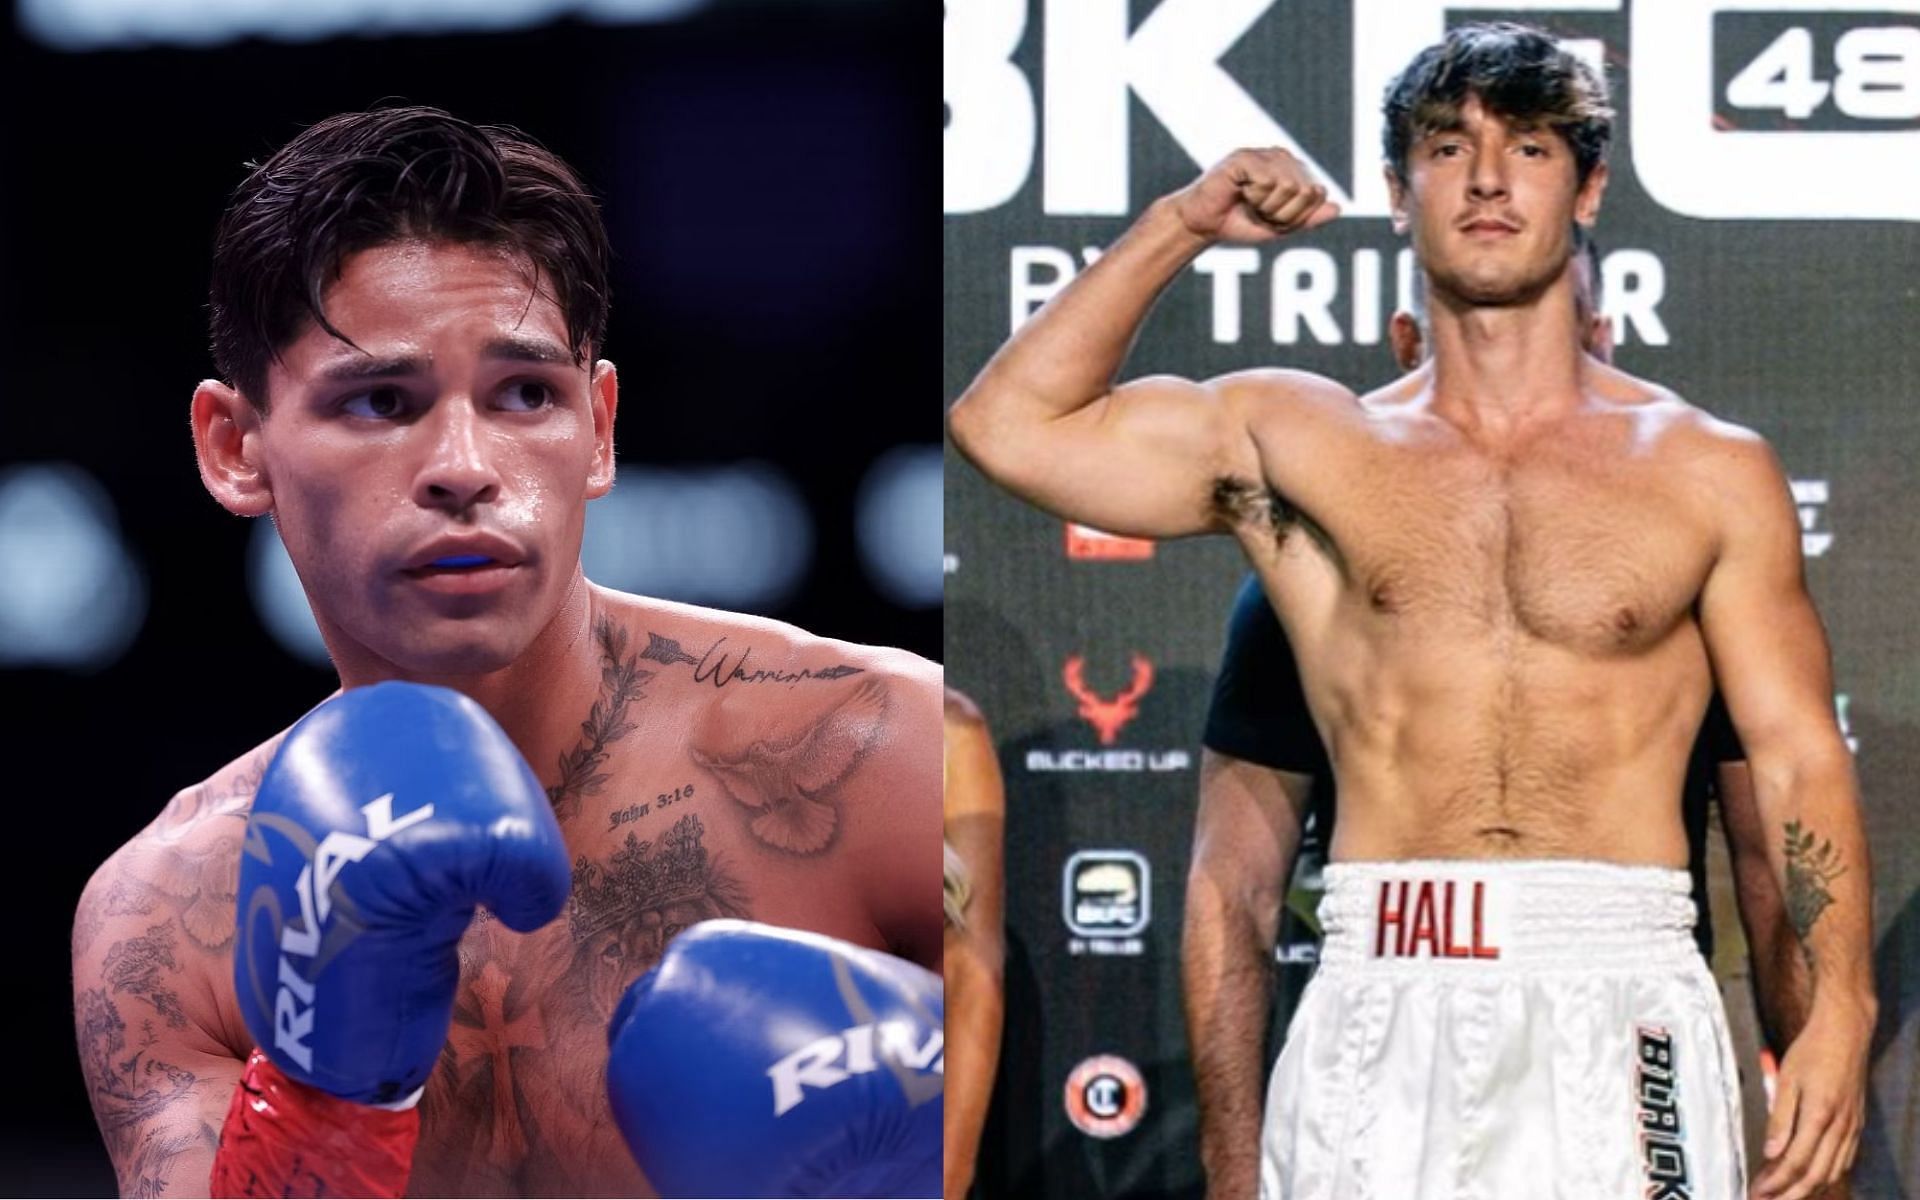 Bryce Hall (right) fires back at Ryan Garcia